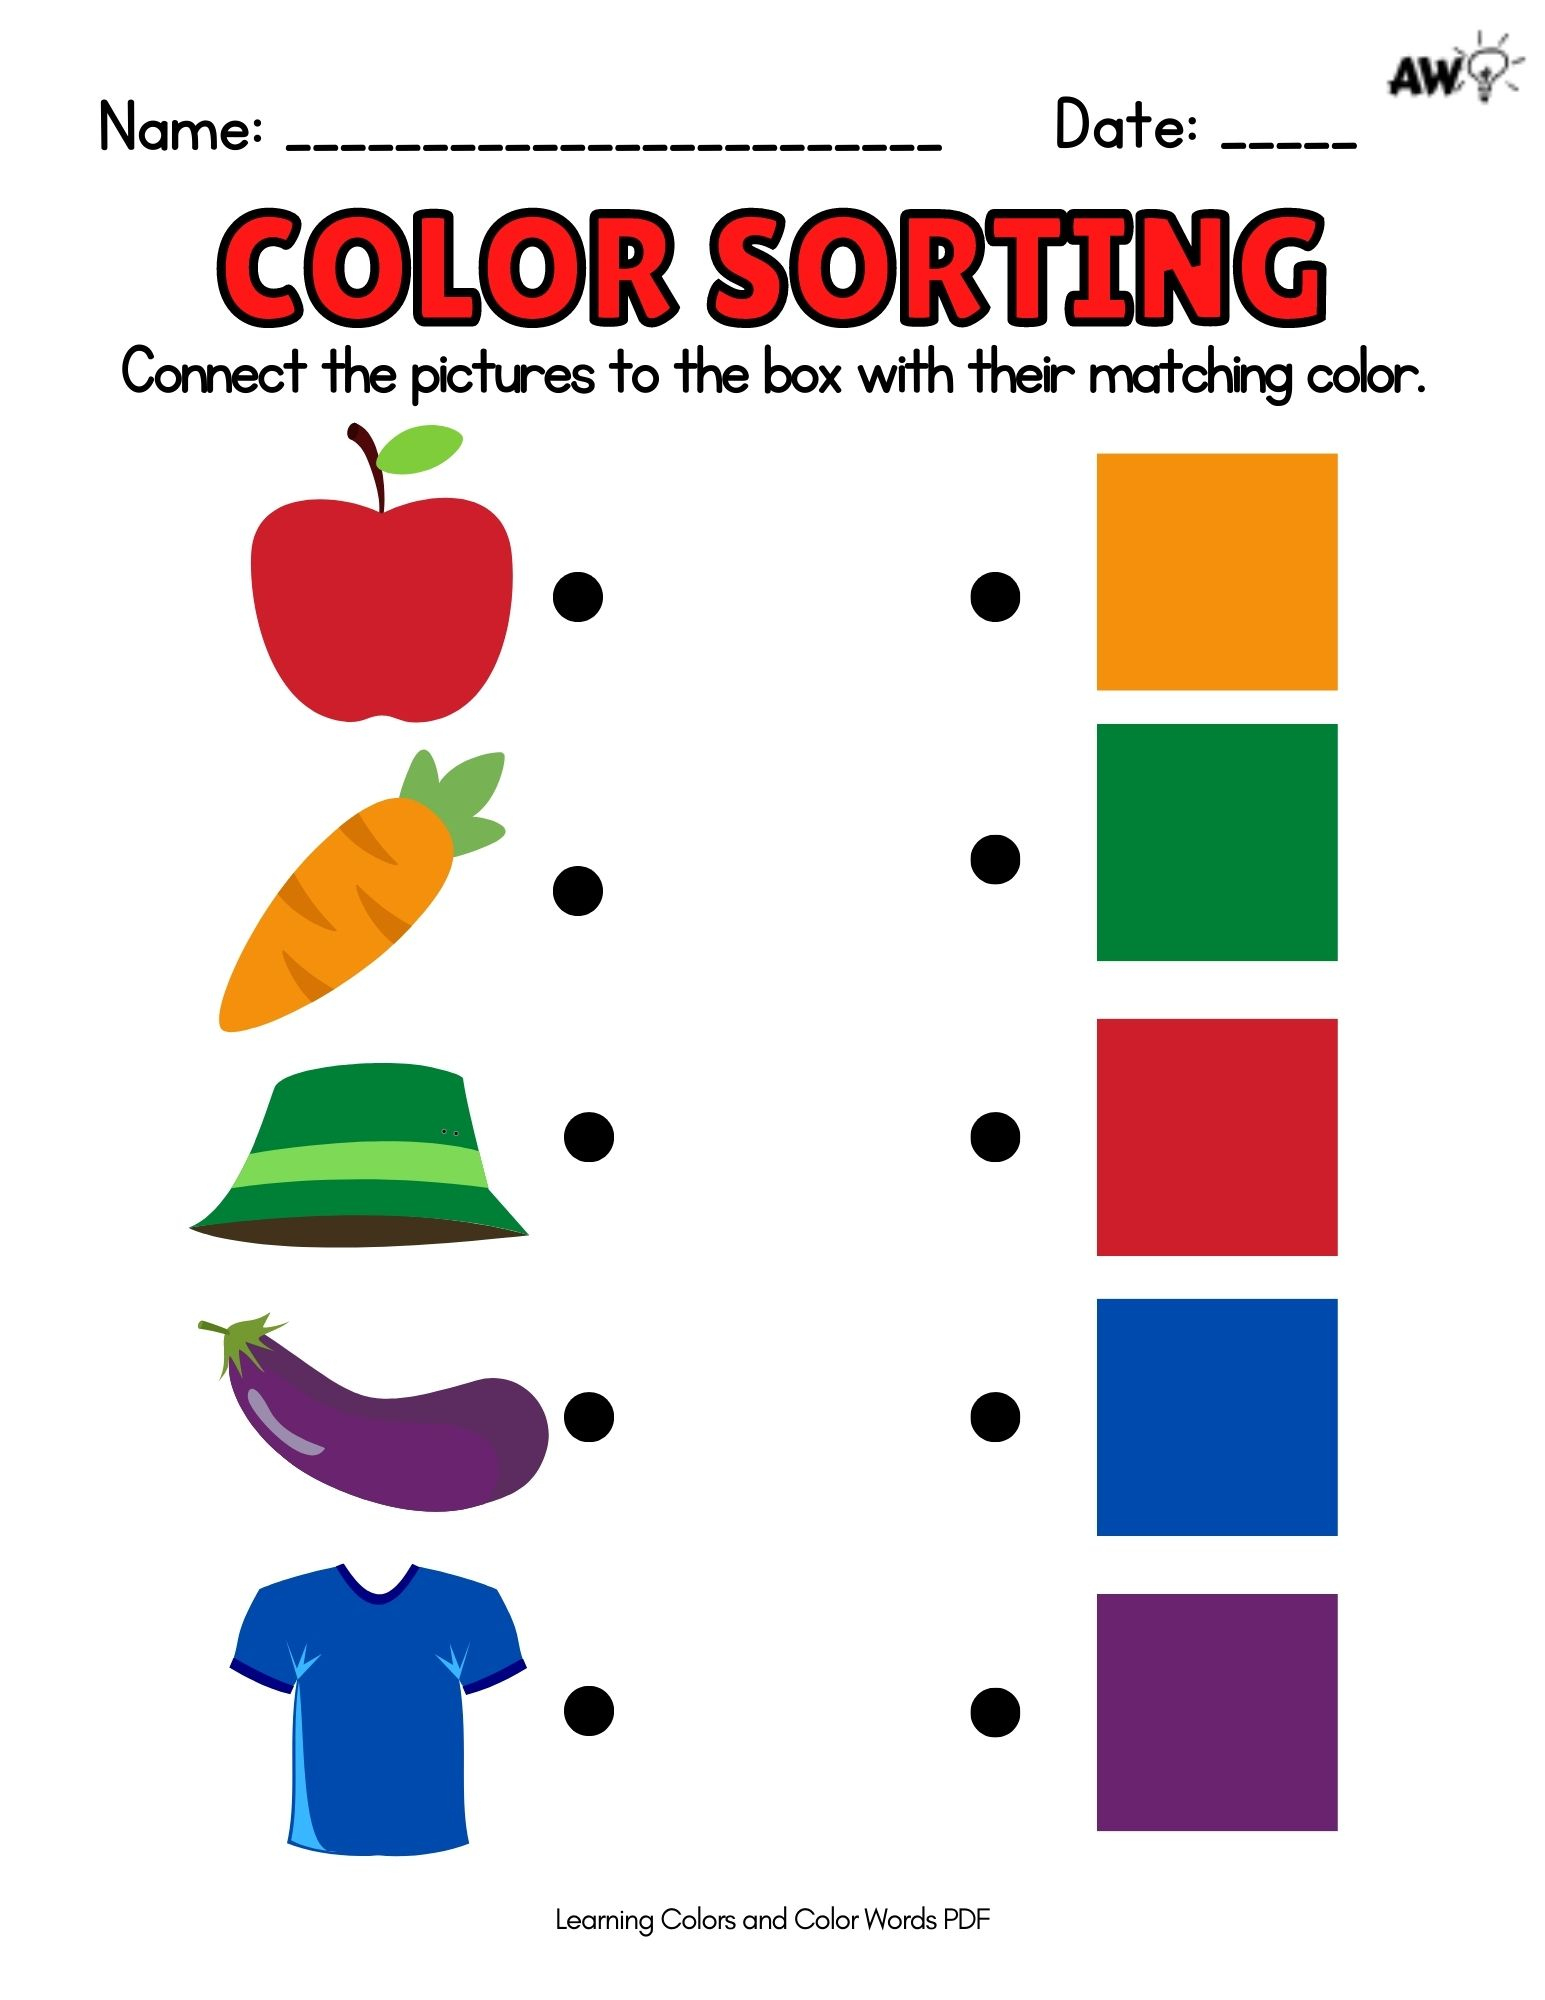 Matching Colors Worksheets - Pre-K - Academy Worksheets regarding Colors Worksheets For Preschoolers Free Printables